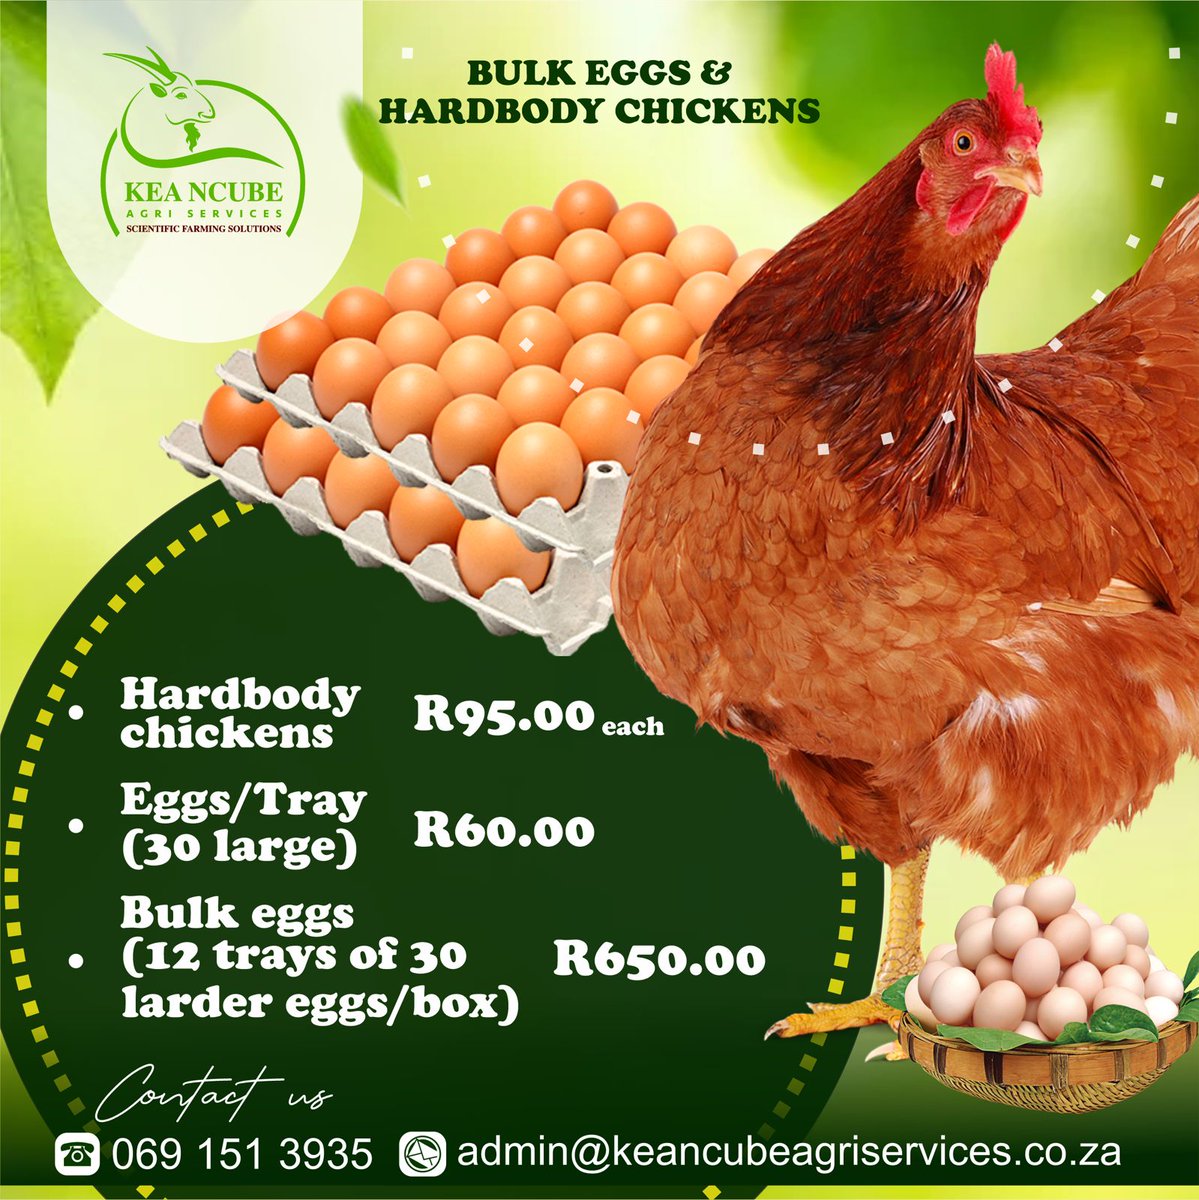 A-grade quality eggs and hard body chicken available for sale🥚🍳🐓. Free delivery in Pretoria and surrounding areas (Ts & Cs apply). Order via WhatsApp on 069 151 3935.

#KeaNcubeAgriServices
#ScientificFarming
#FreeRangeChicken